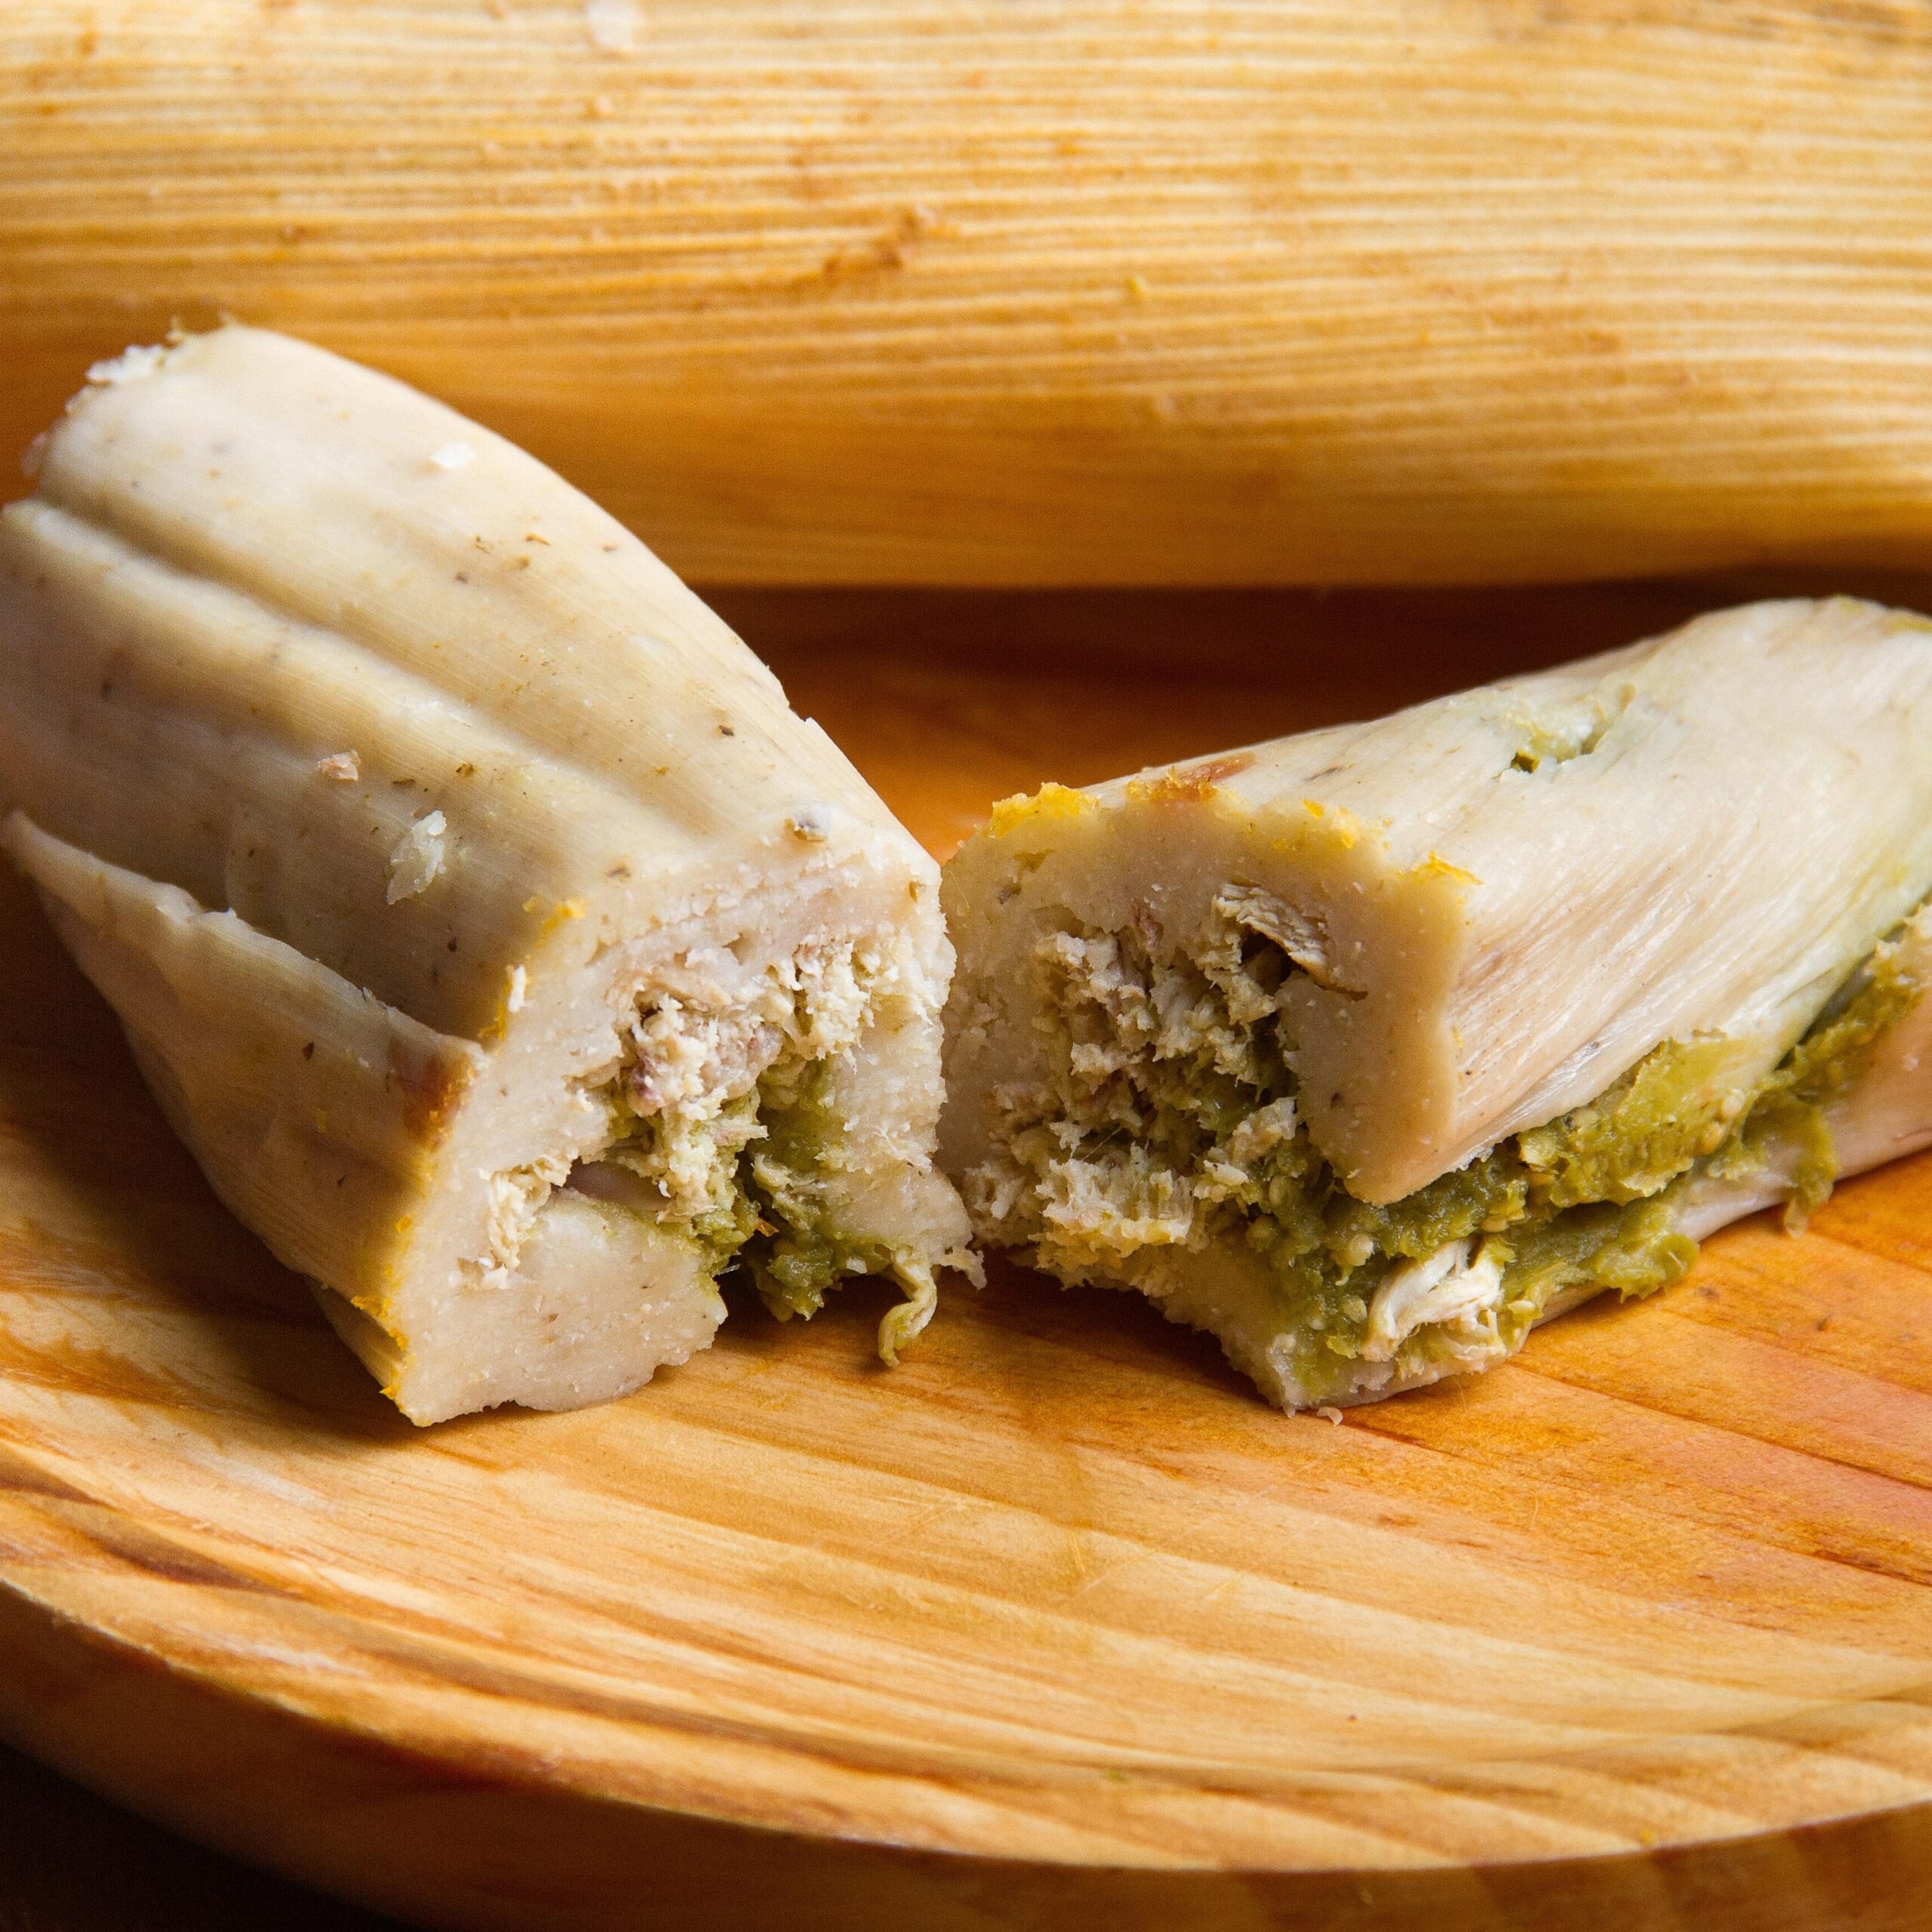  A colorful and flavorful feast: Tamales with Cheese, Olives, and Chilies!